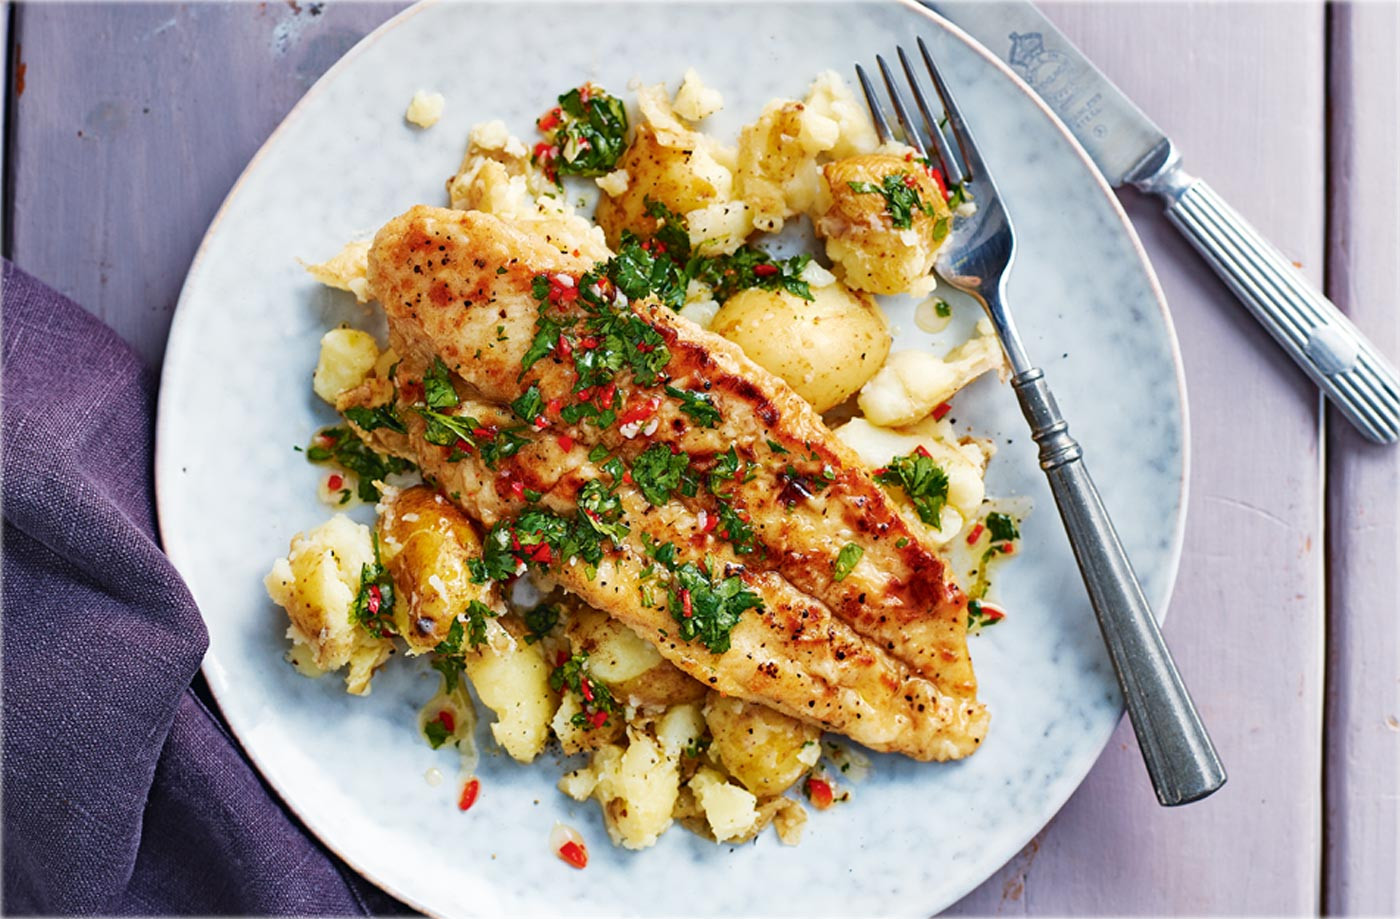 Recipes For Fish Fillet
 Pan fried panga fillets with garlic potatoes Your